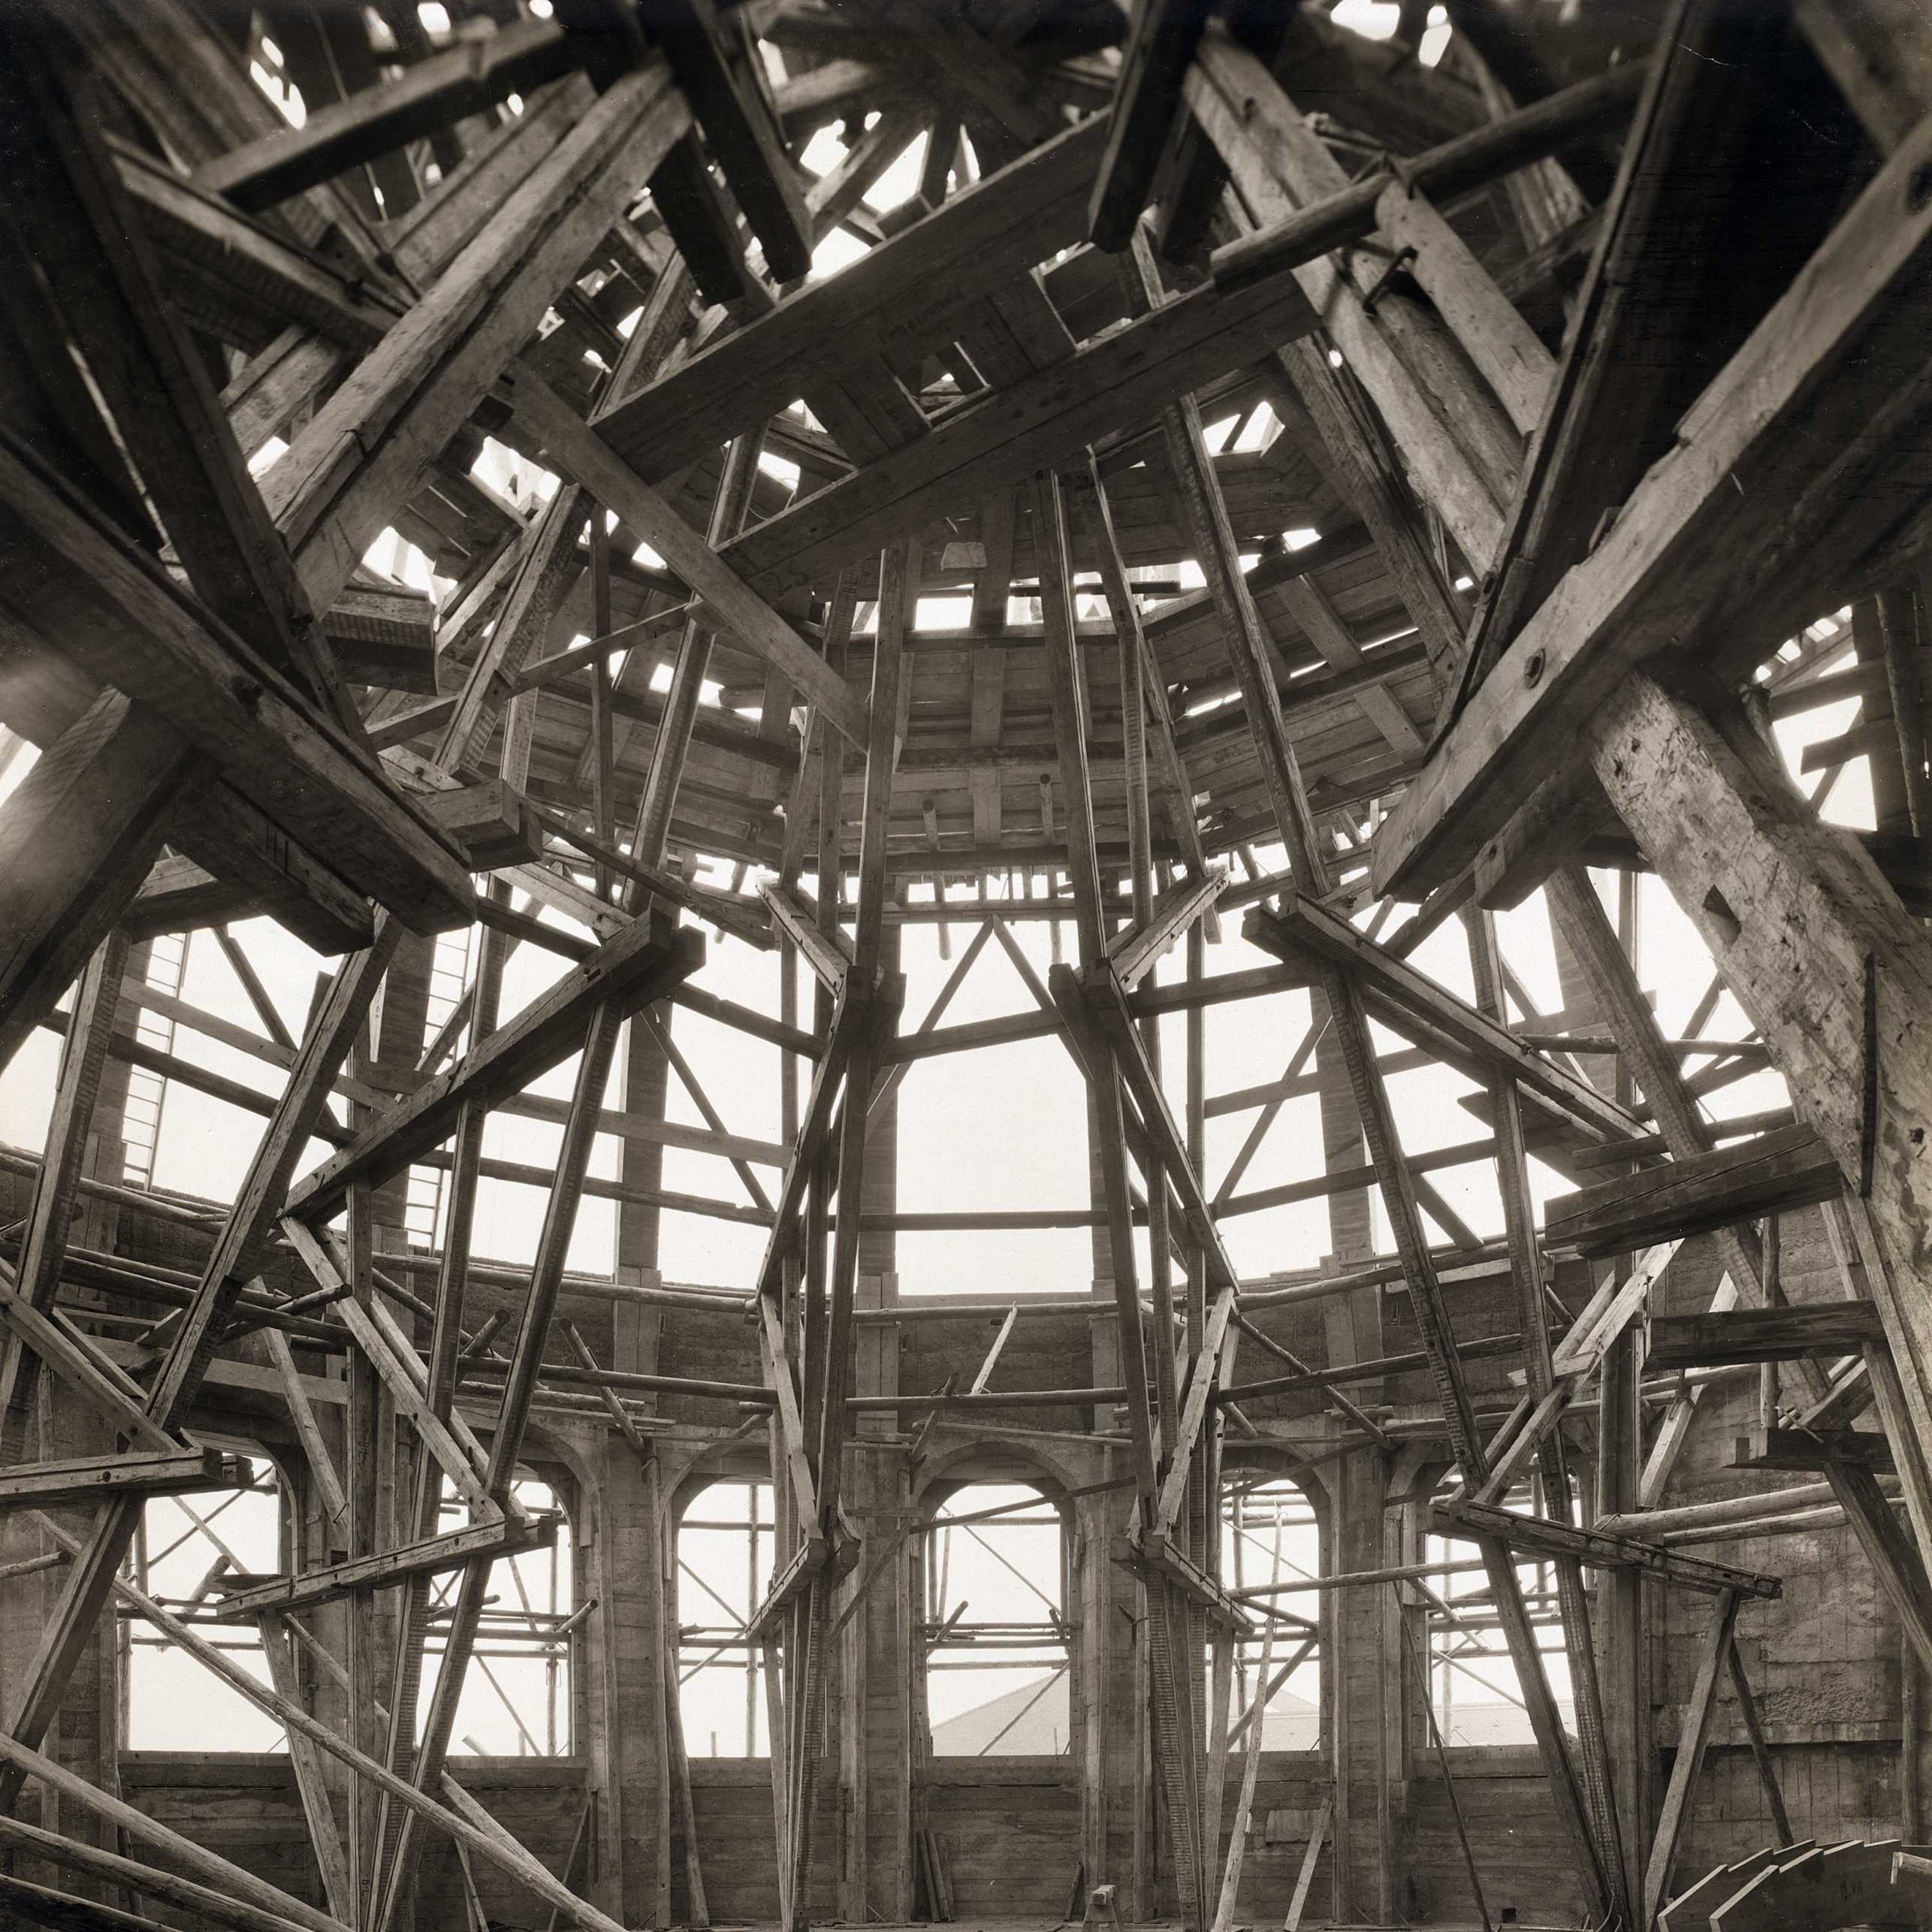 The building of the ETH dome in 1919/20 was both a reflection of the past and an indication of growing self-confidence.